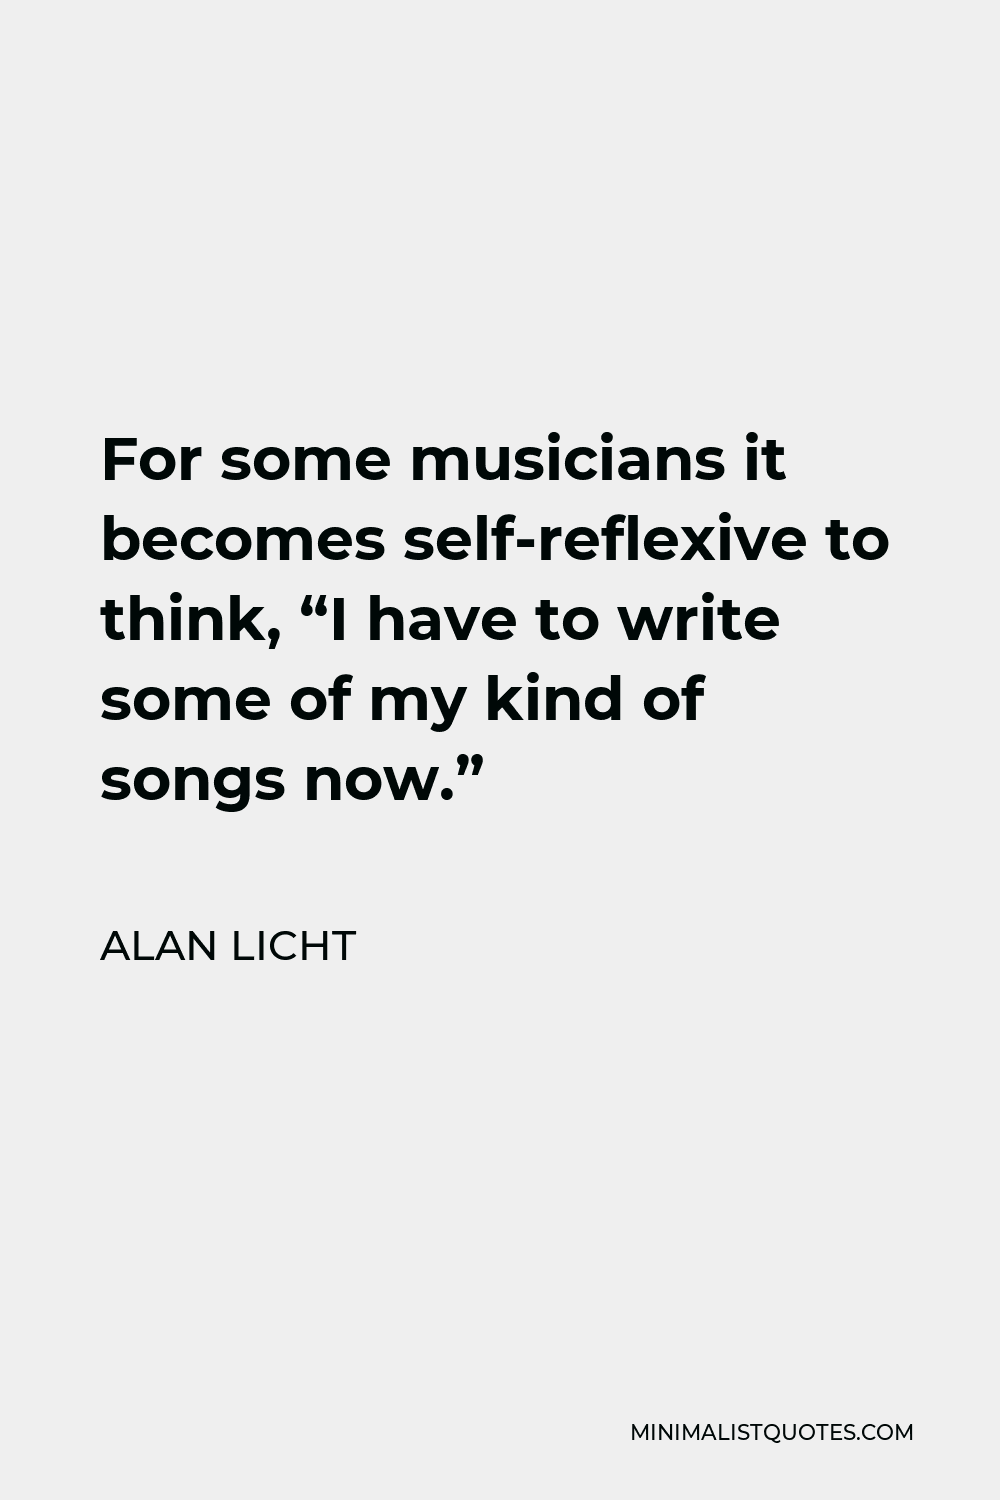 Alan Licht Quote - For some musicians it becomes self-reflexive to think, “I have to write some of my kind of songs now.”